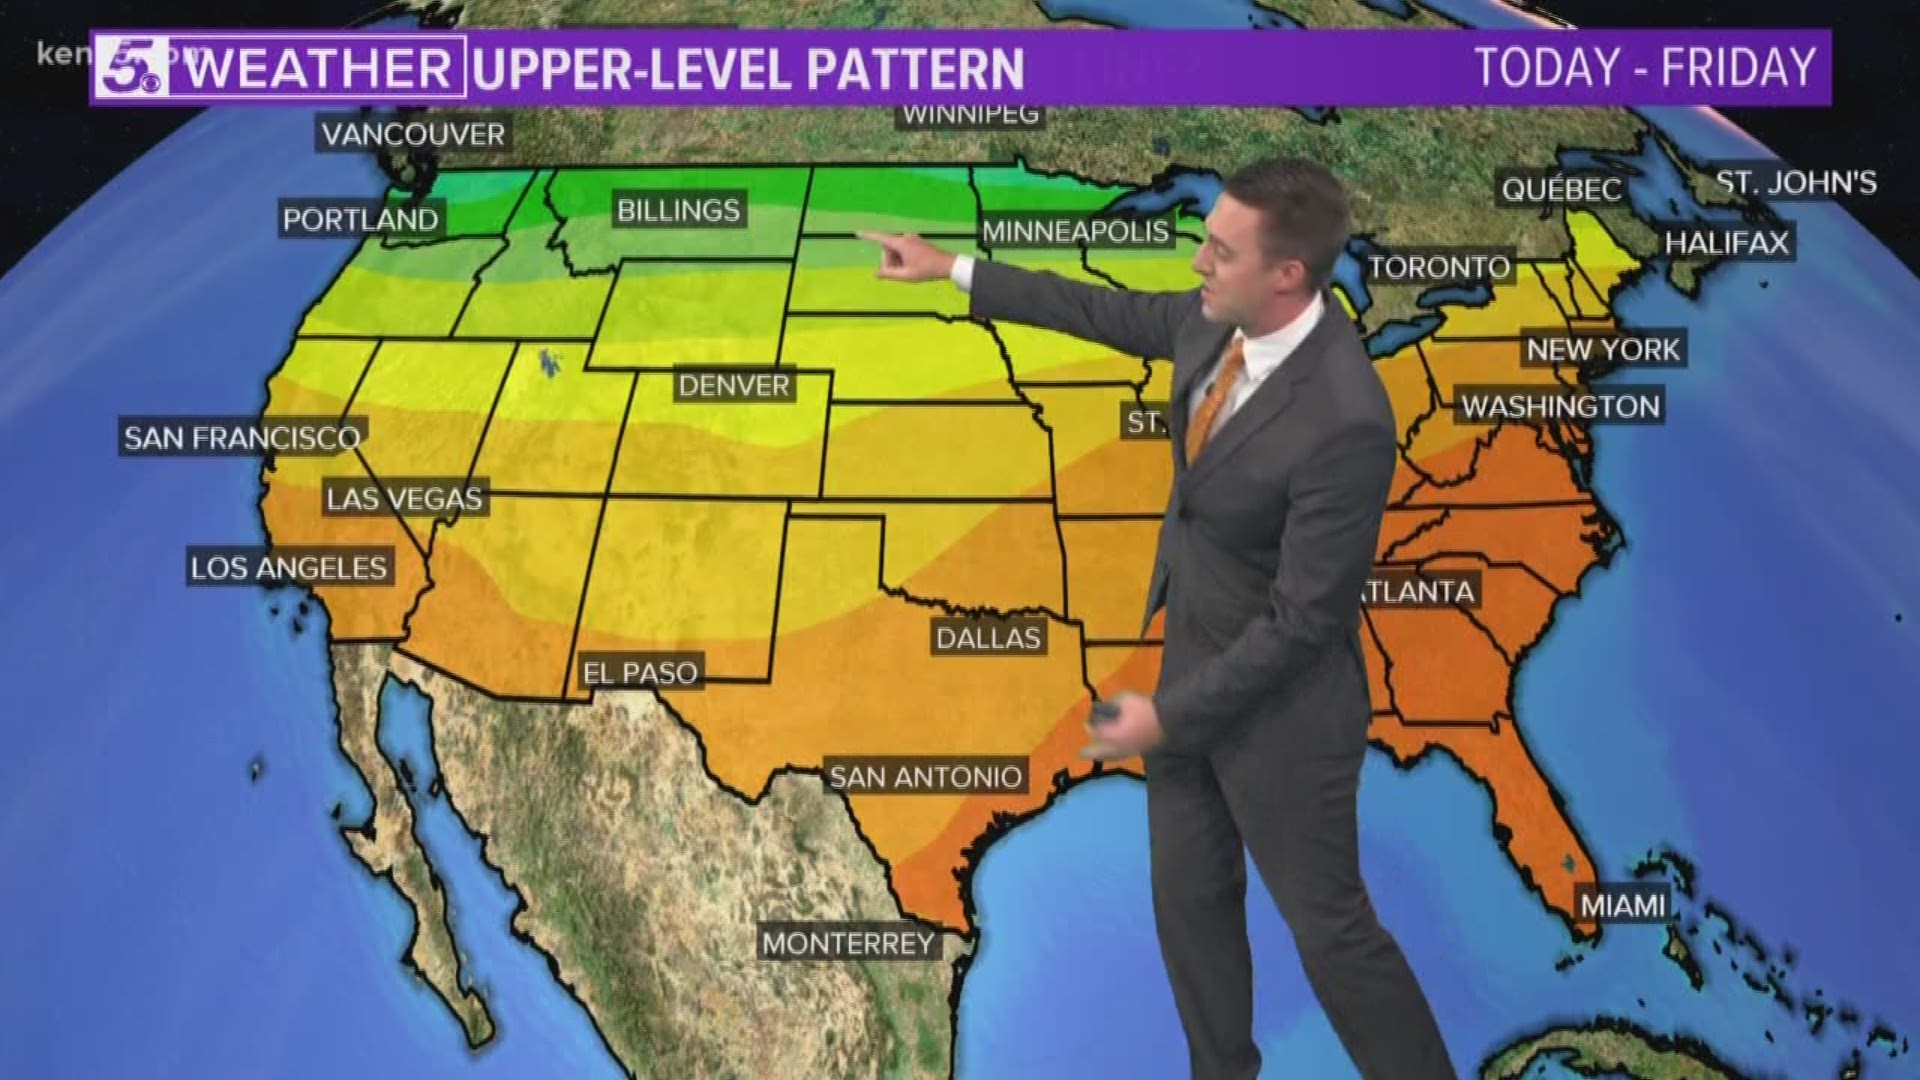 It's officially fall, but temperatures are no reflection of a change in season. Meteorologist Andrew Wilson expands our Weather Minds on how soon it might cool off.